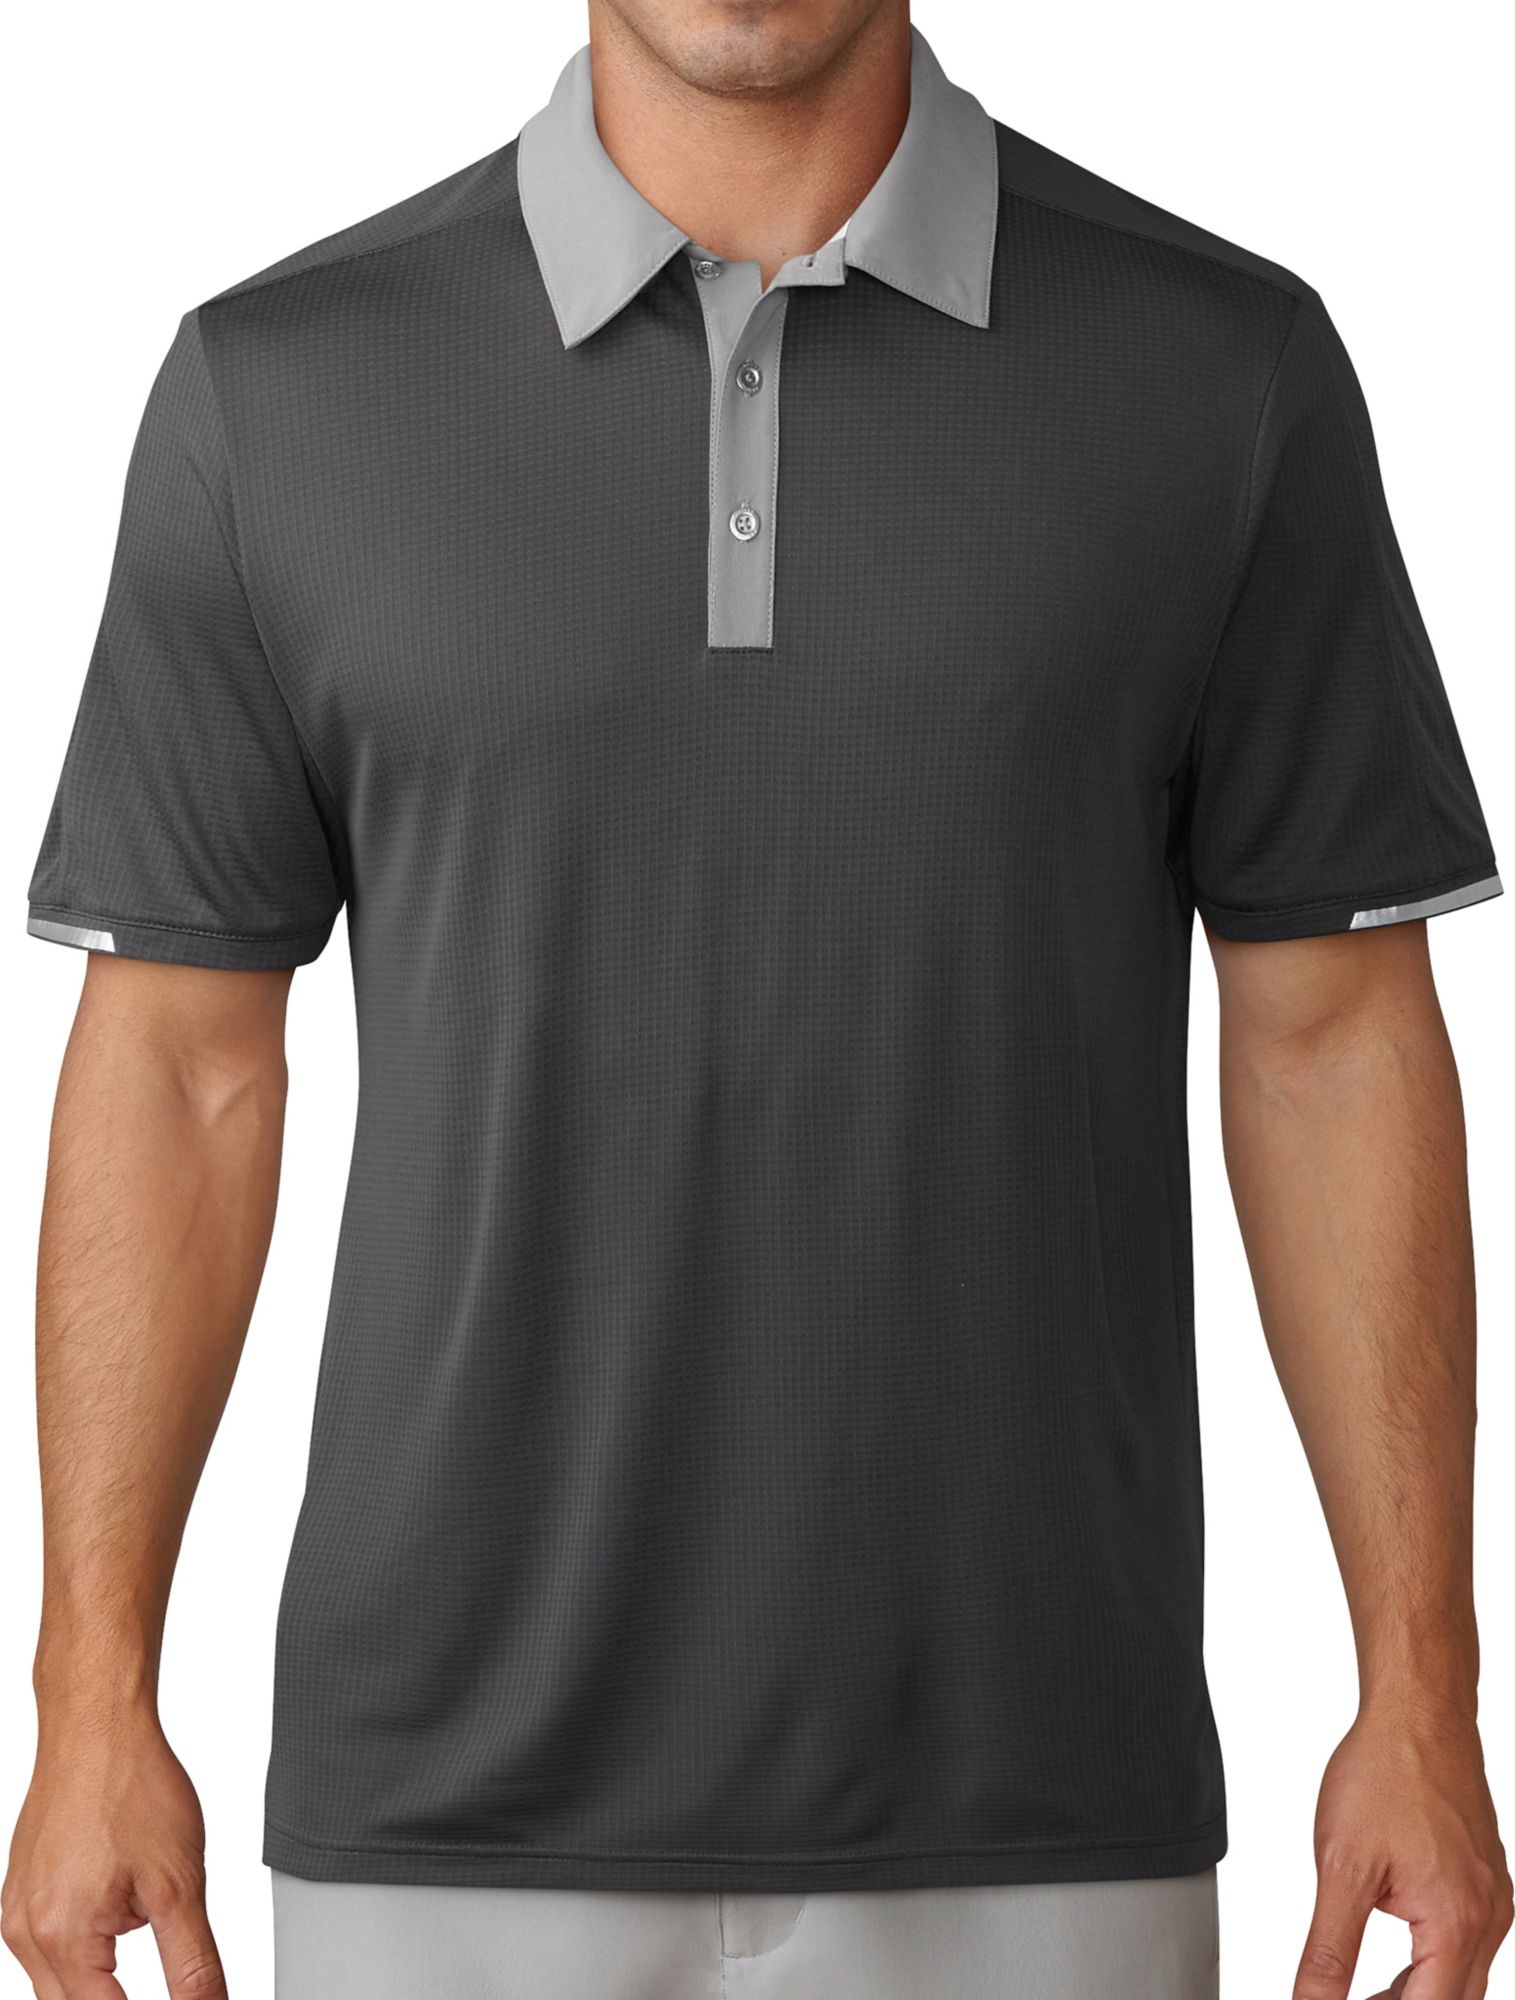 climachill Iconic Golf Polo 